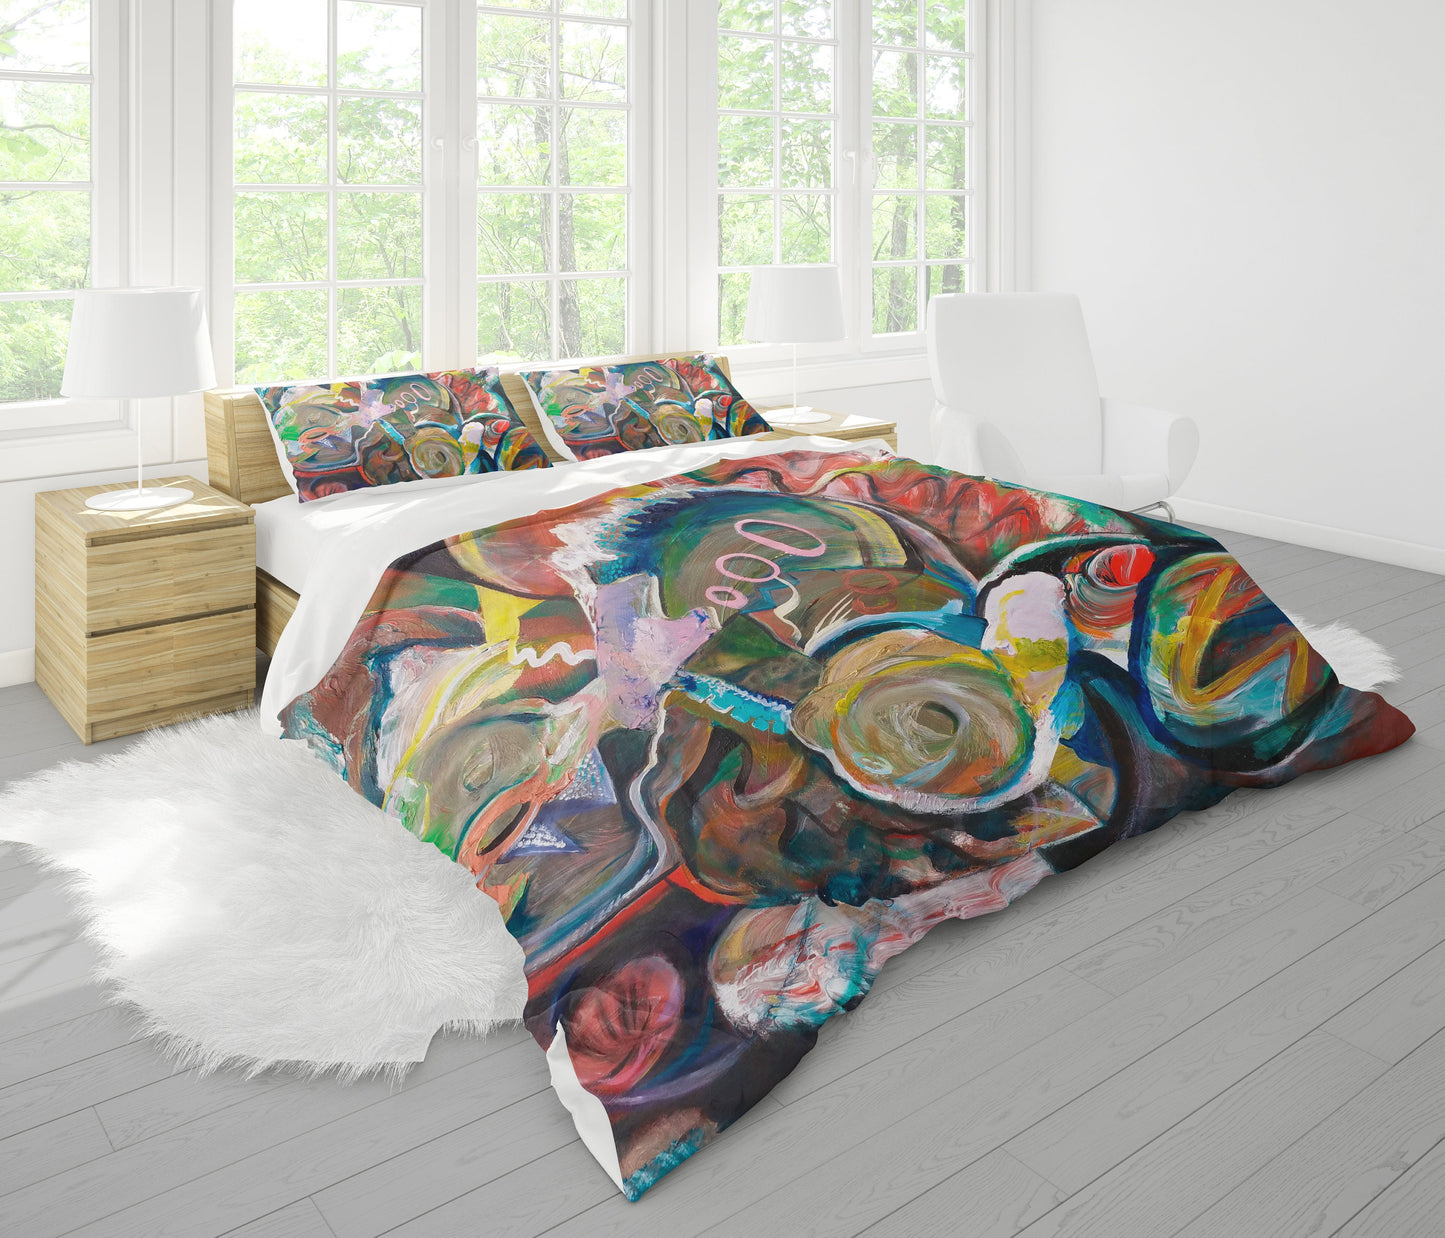 Abstract Art Duvet Cover or Comforter Artsy Colorful bedding Twin Queen King bed sets Unique gift red orange blue yellow artwork colorful